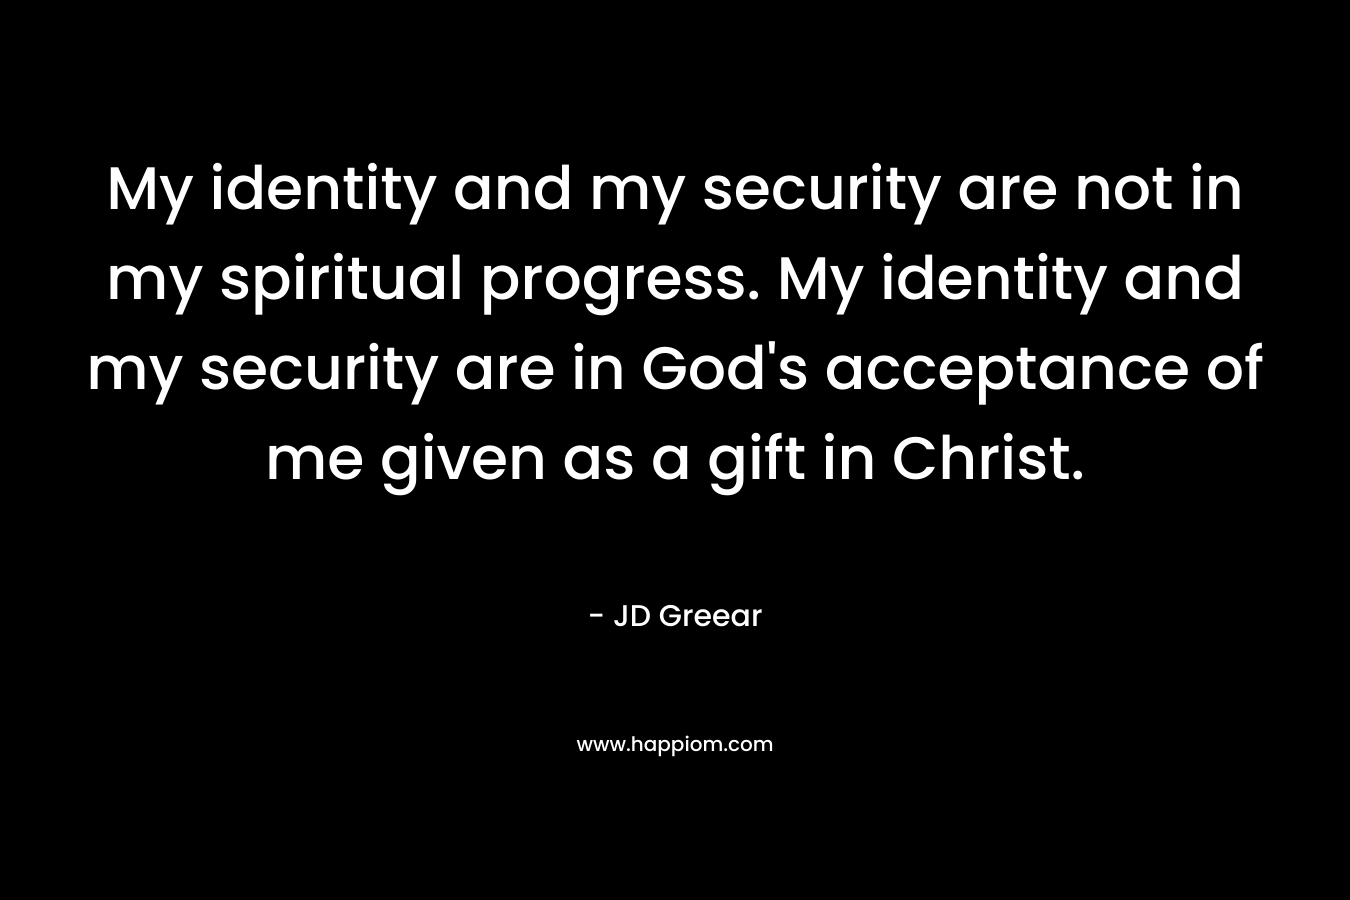 My identity and my security are not in my spiritual progress. My identity and my security are in God's acceptance of me given as a gift in Christ.